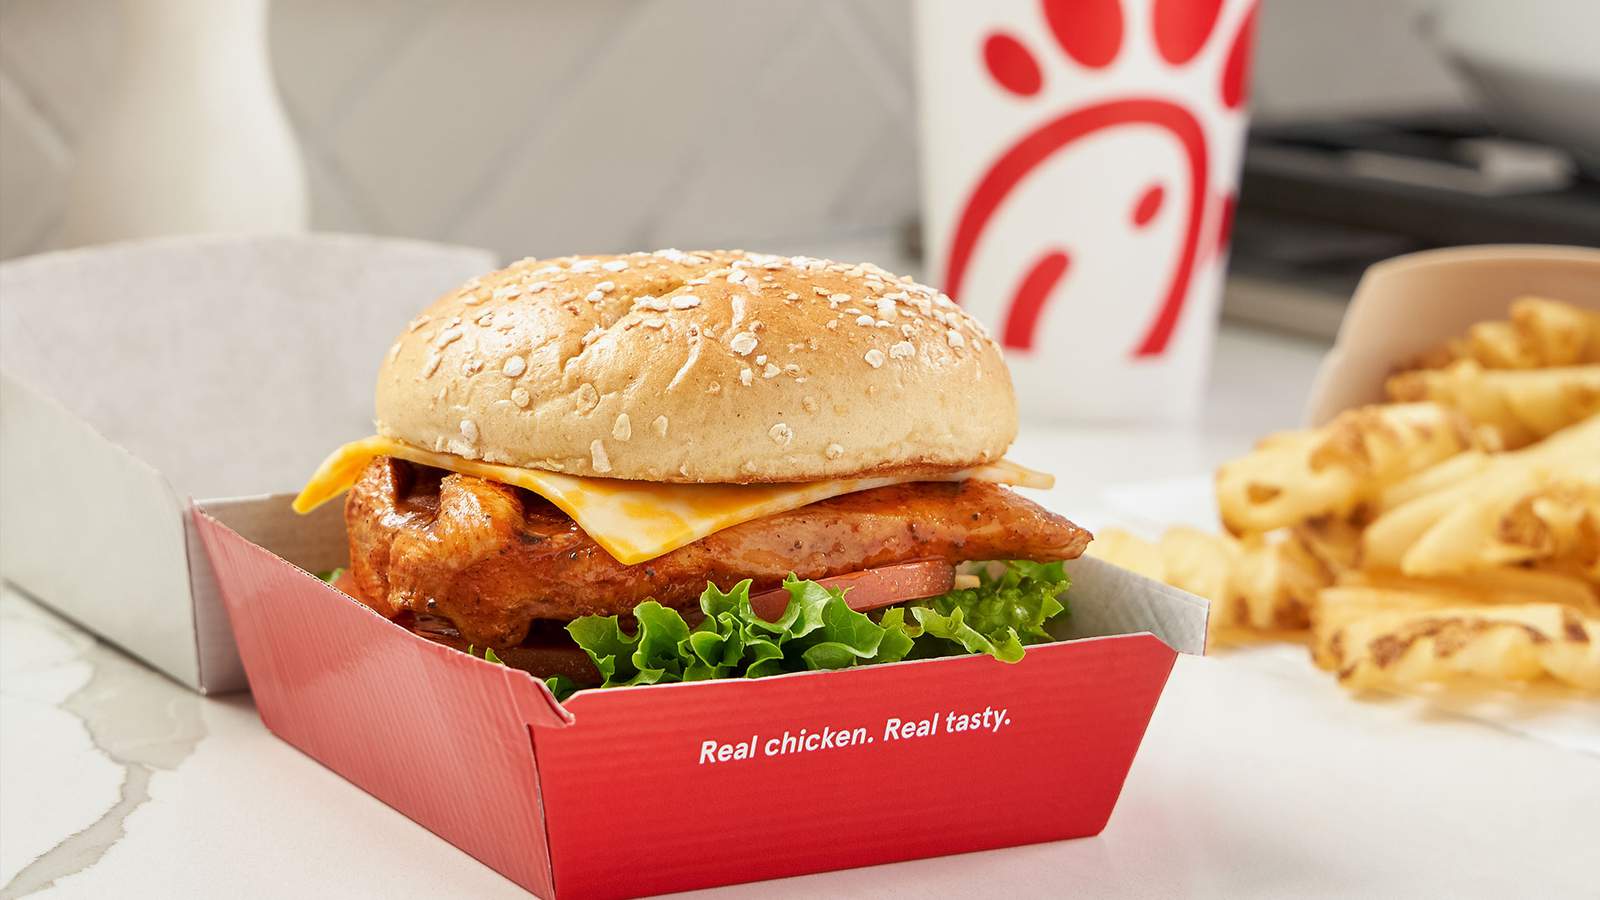 Chick-fil-A adds spicy chicken sandwich to menu for limited time